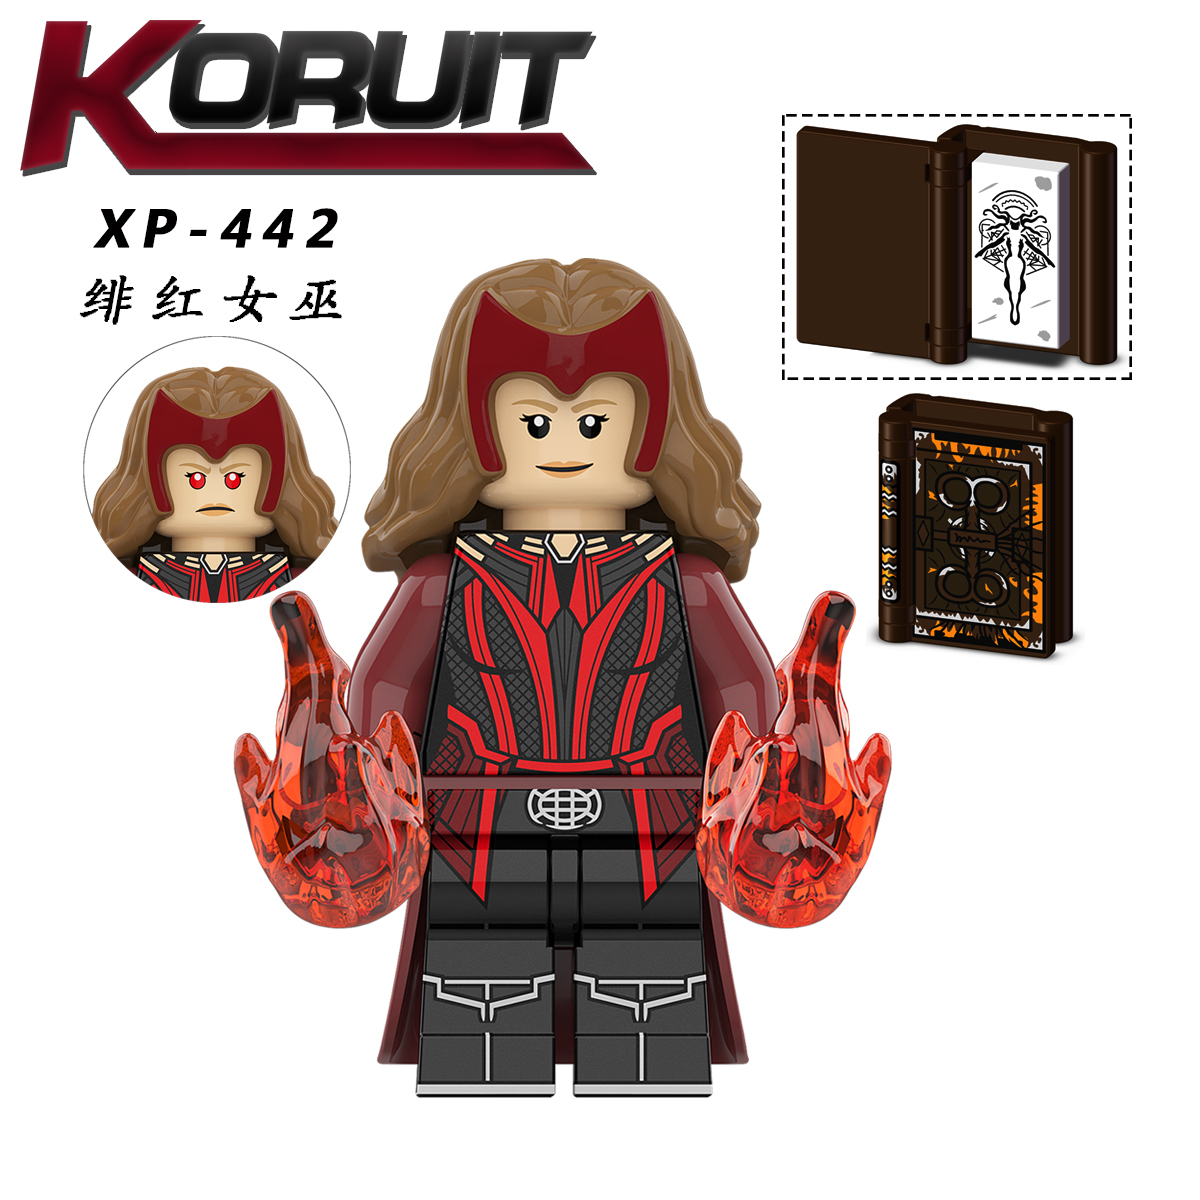 KT1057 XP435 XP436 XP437 XP438 XP439 XP440 XP441 XP442 The Avengers Doctor Strange Scarlet Witch King Movie Series Building Blocks Action Figures Educational Toys For Kids Gifts